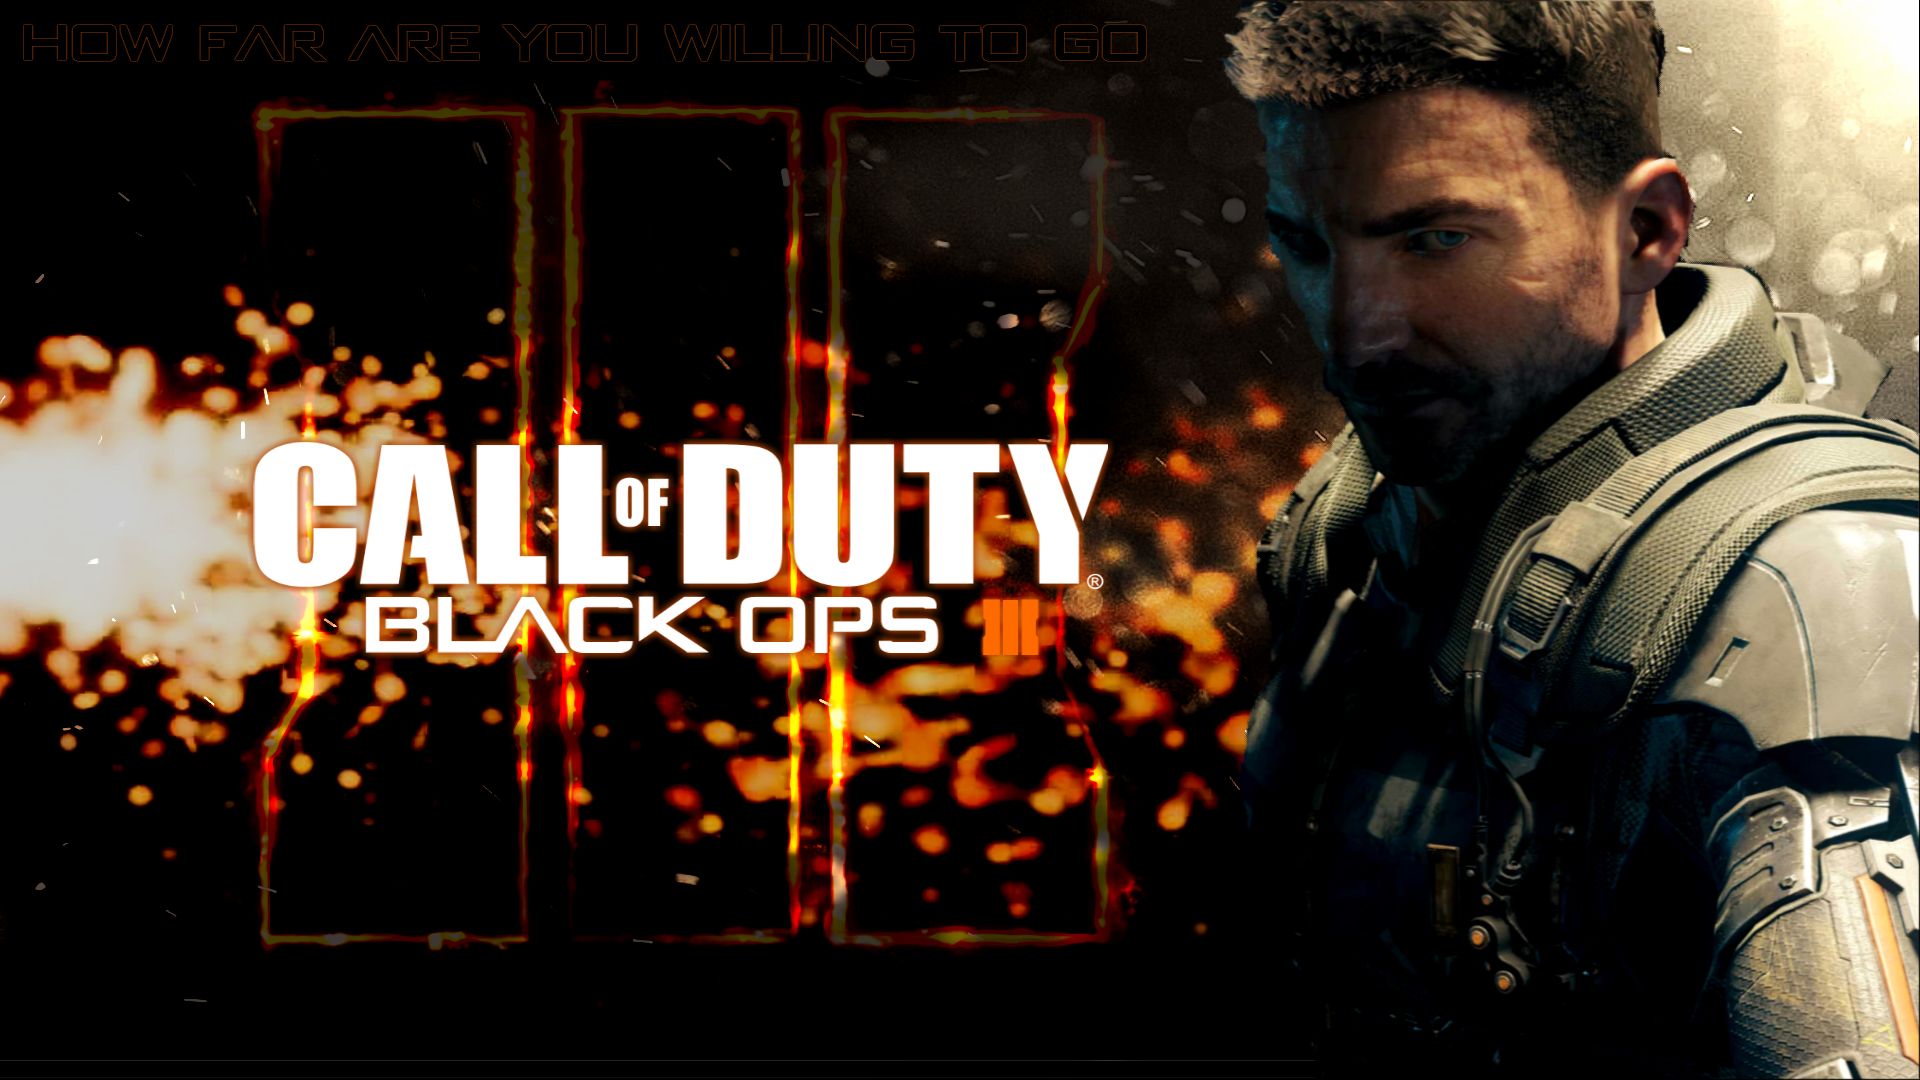 Magnificent Call of Duty Black Ops III Wallpaper | Full HD Pictures